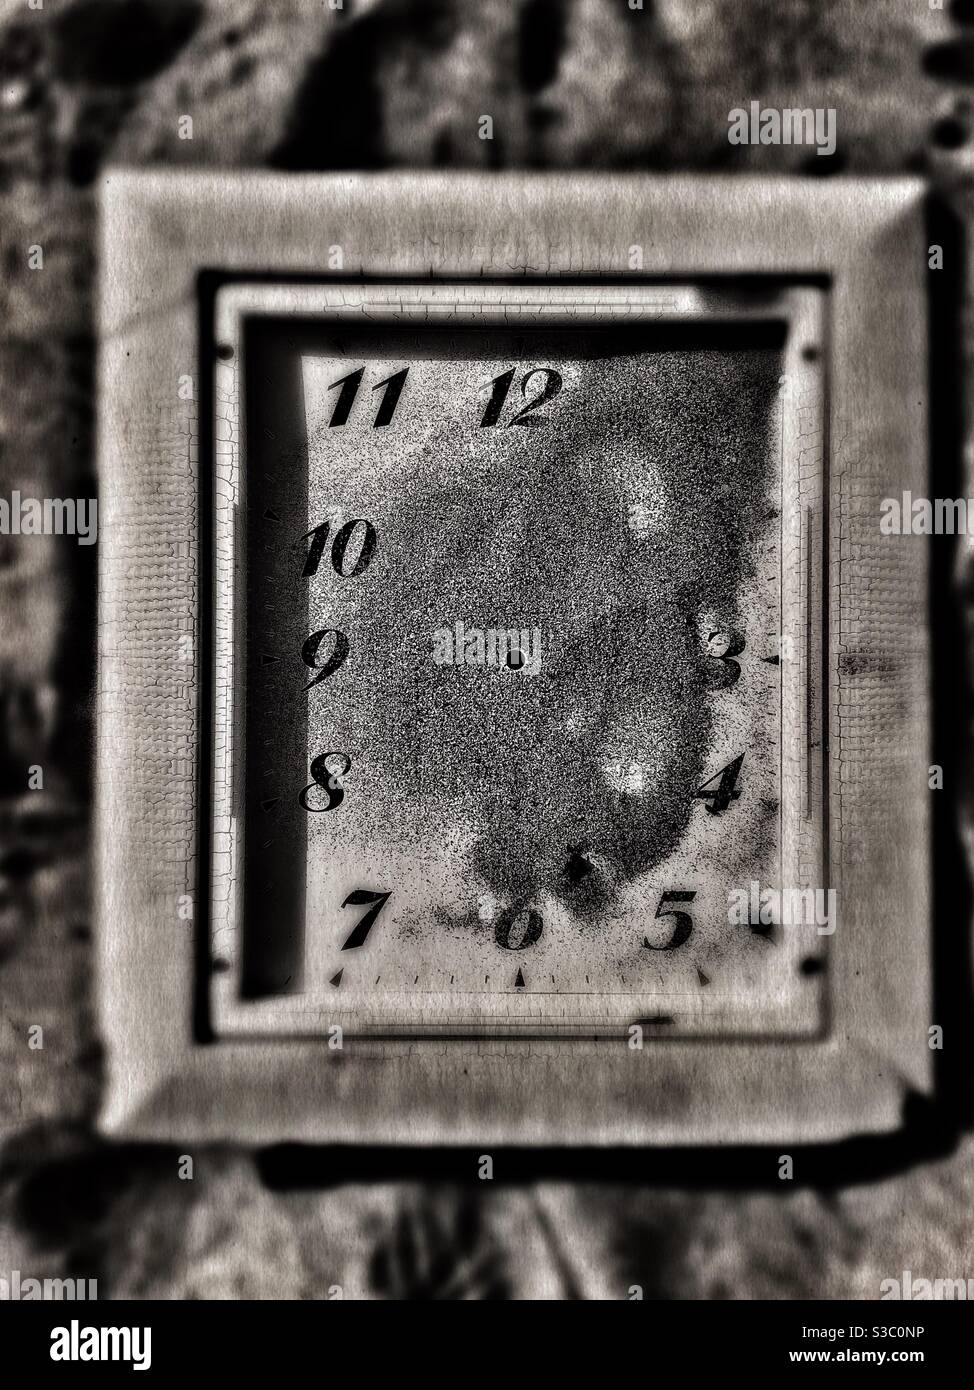 Image of a Wall clock  found on the beach , image edited to give it a vintage look Stock Photo